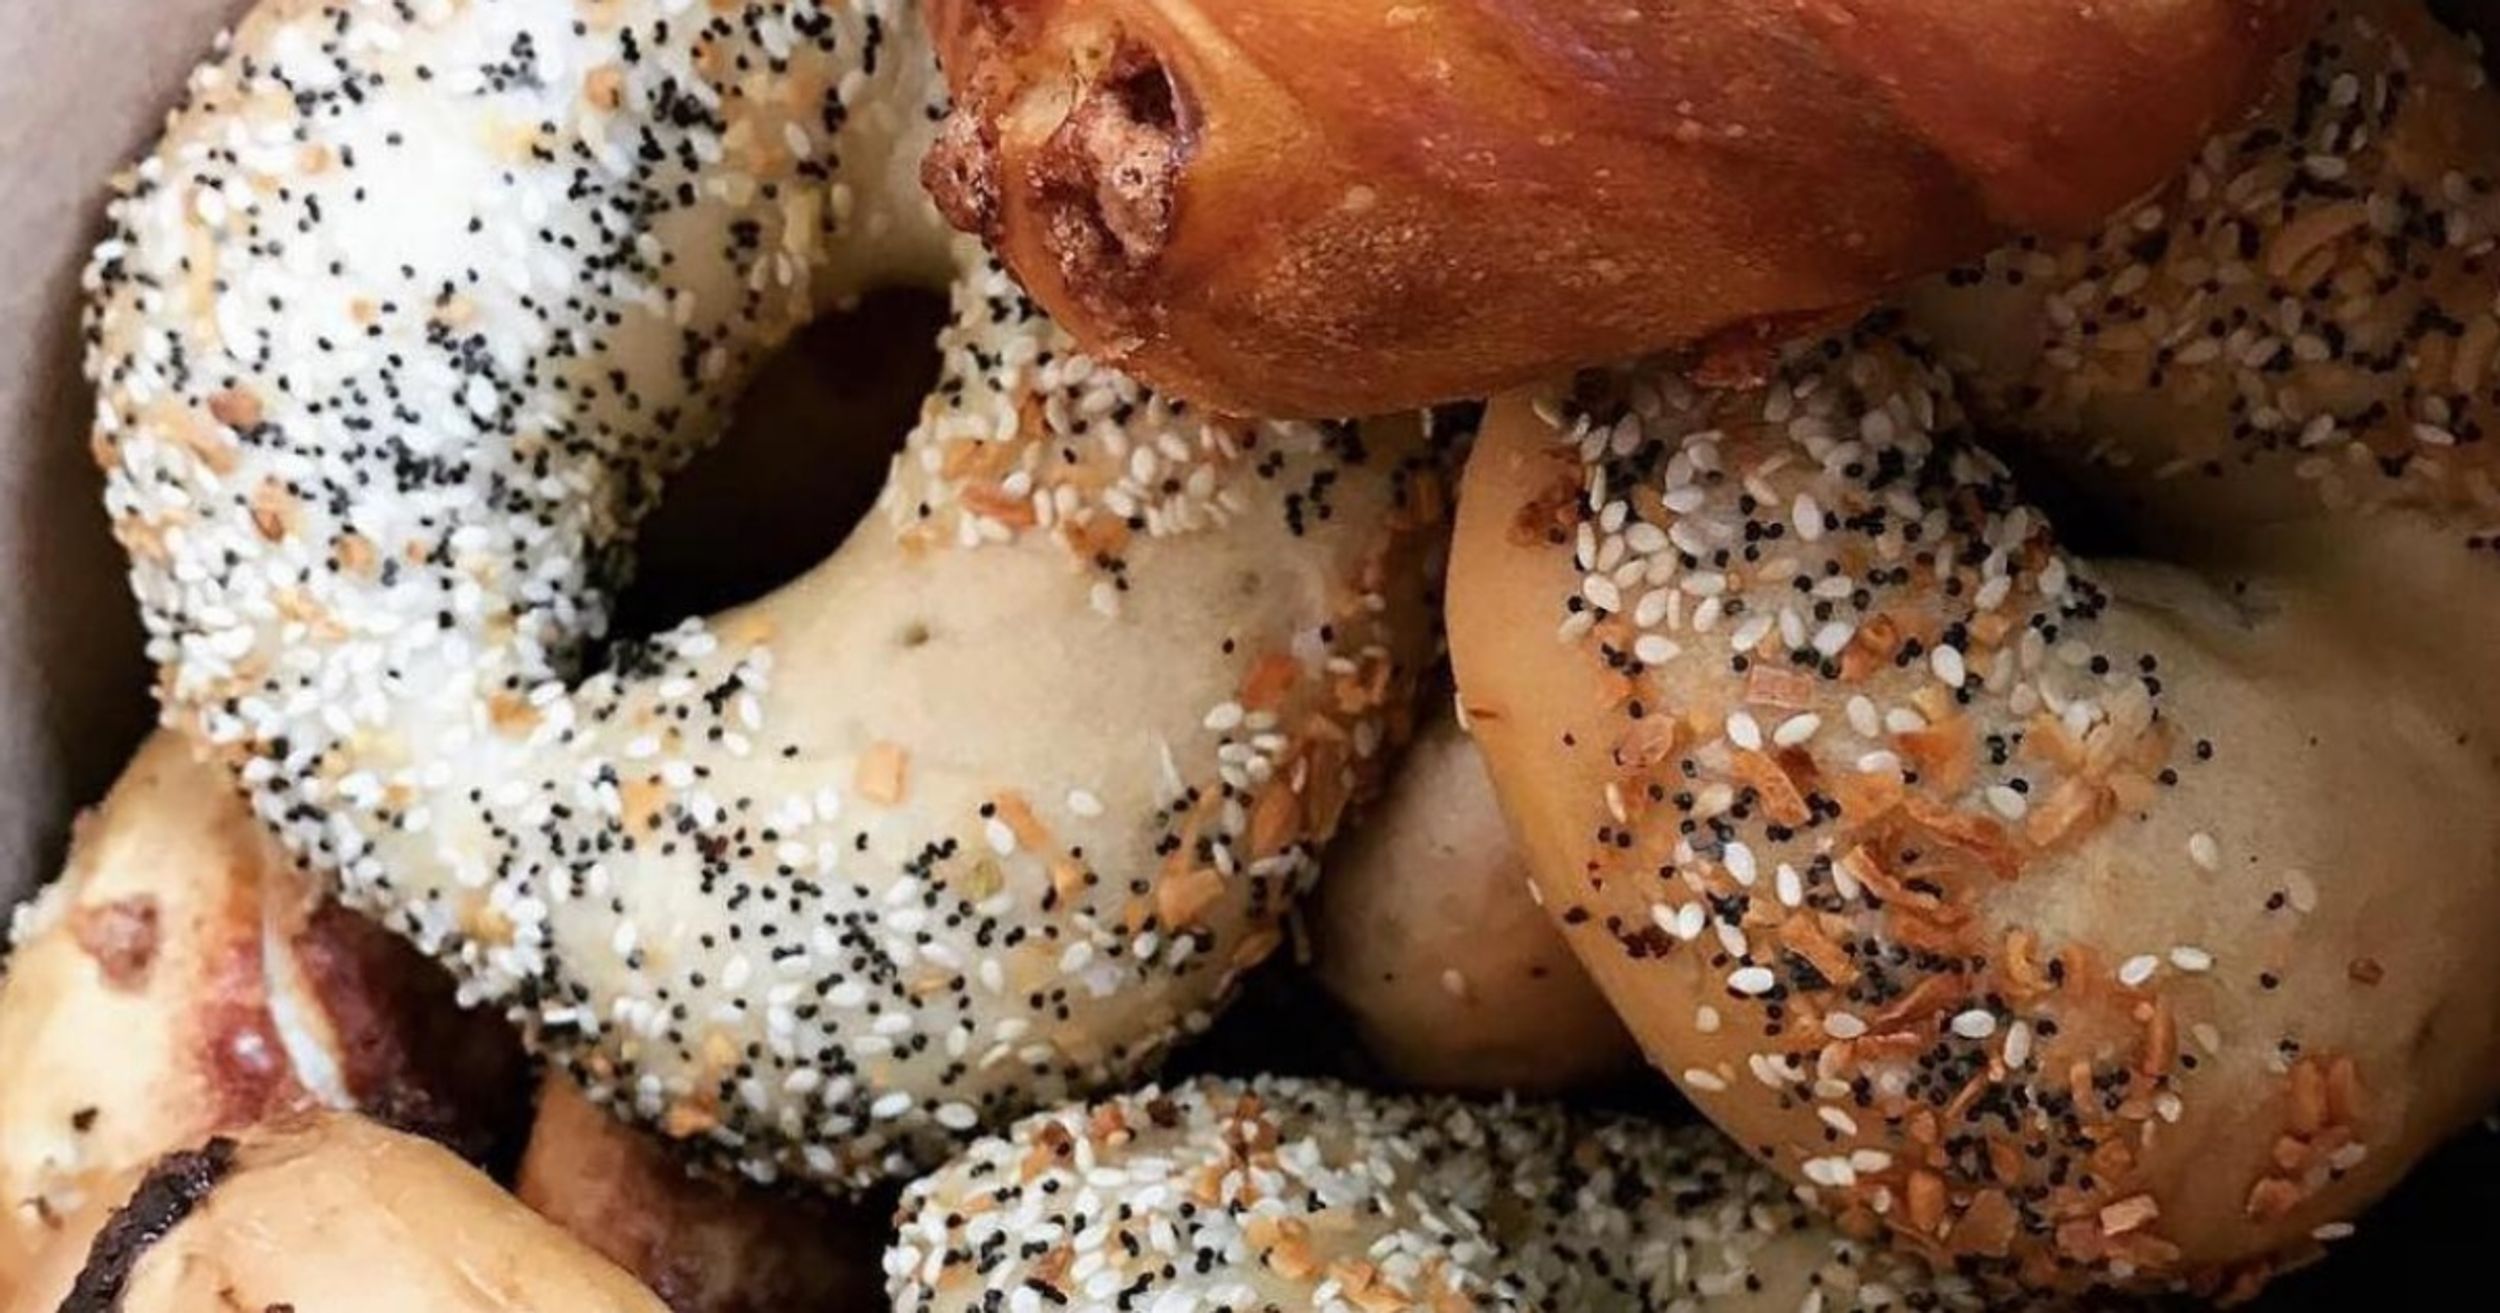 7 College Classes We've All Taken, As Told By Panera Bread Bagels